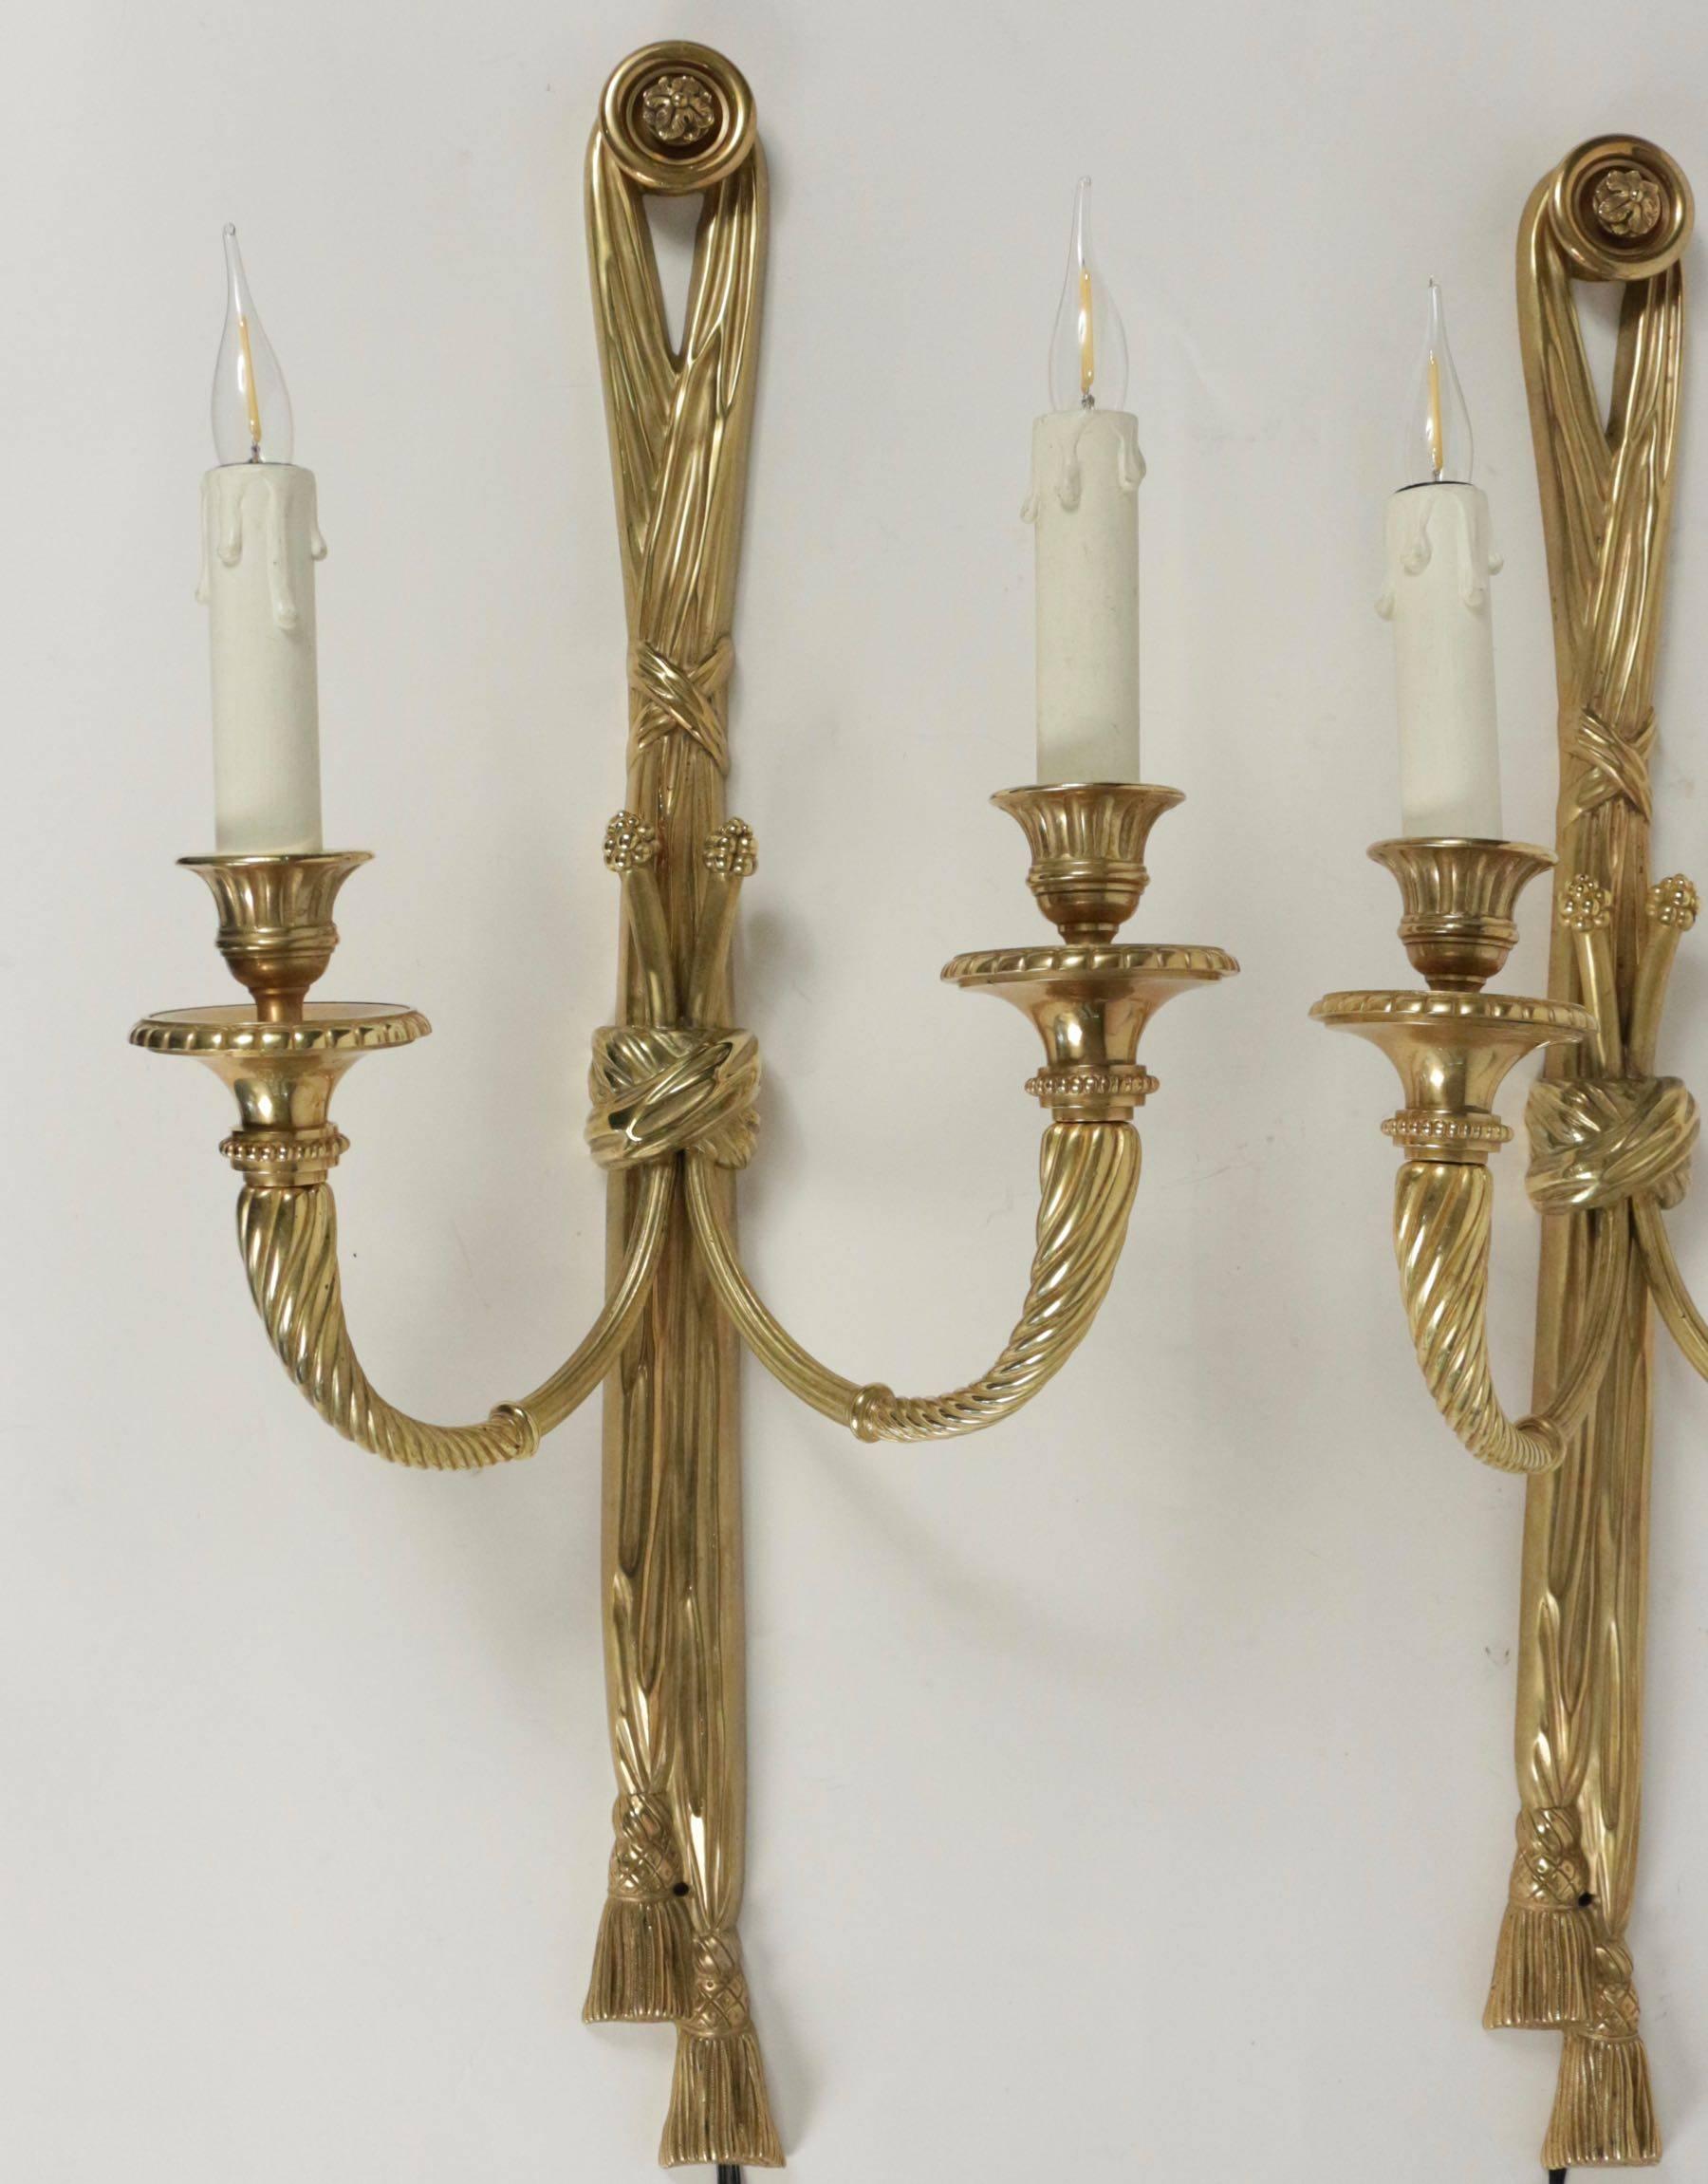 French Important Pair of Sconces in the Style of Louis XVI from the 19th Century